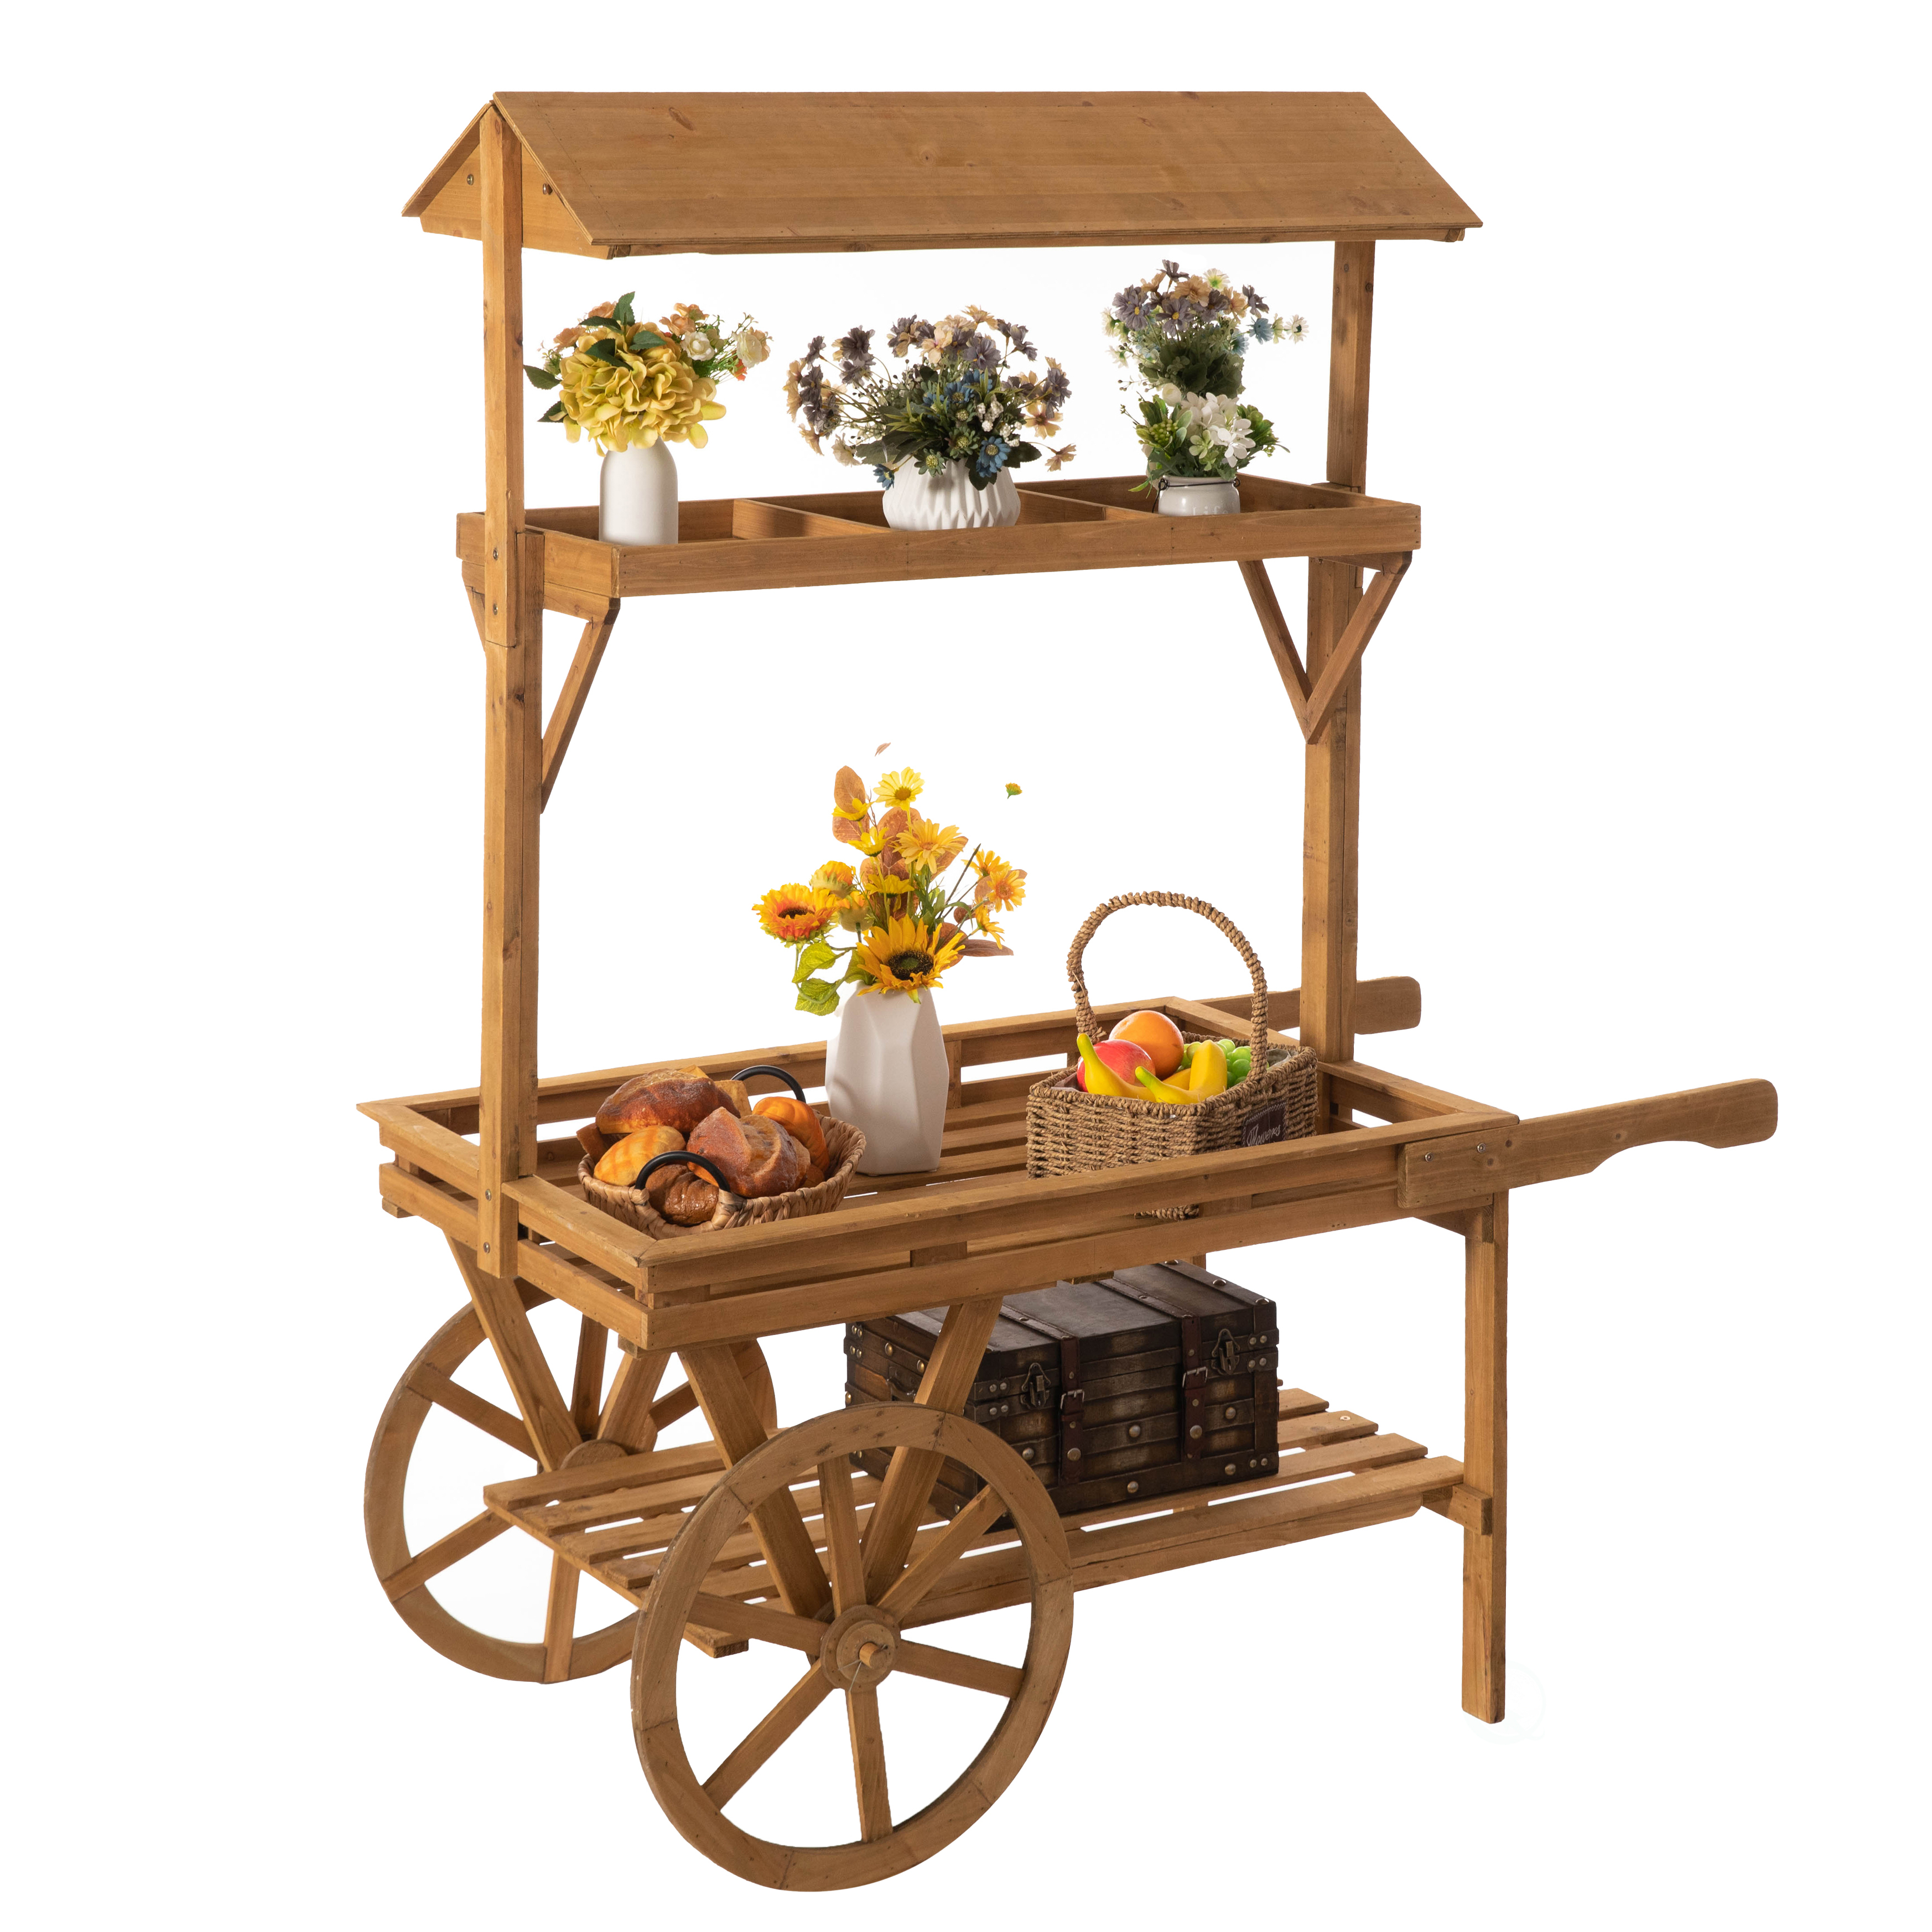 Wooden 3 Tier Rolling Table Cart With 2 Wheels For Home Decor, Display Rack, Lemonade Stand, Food Stand, Or Tea Stall